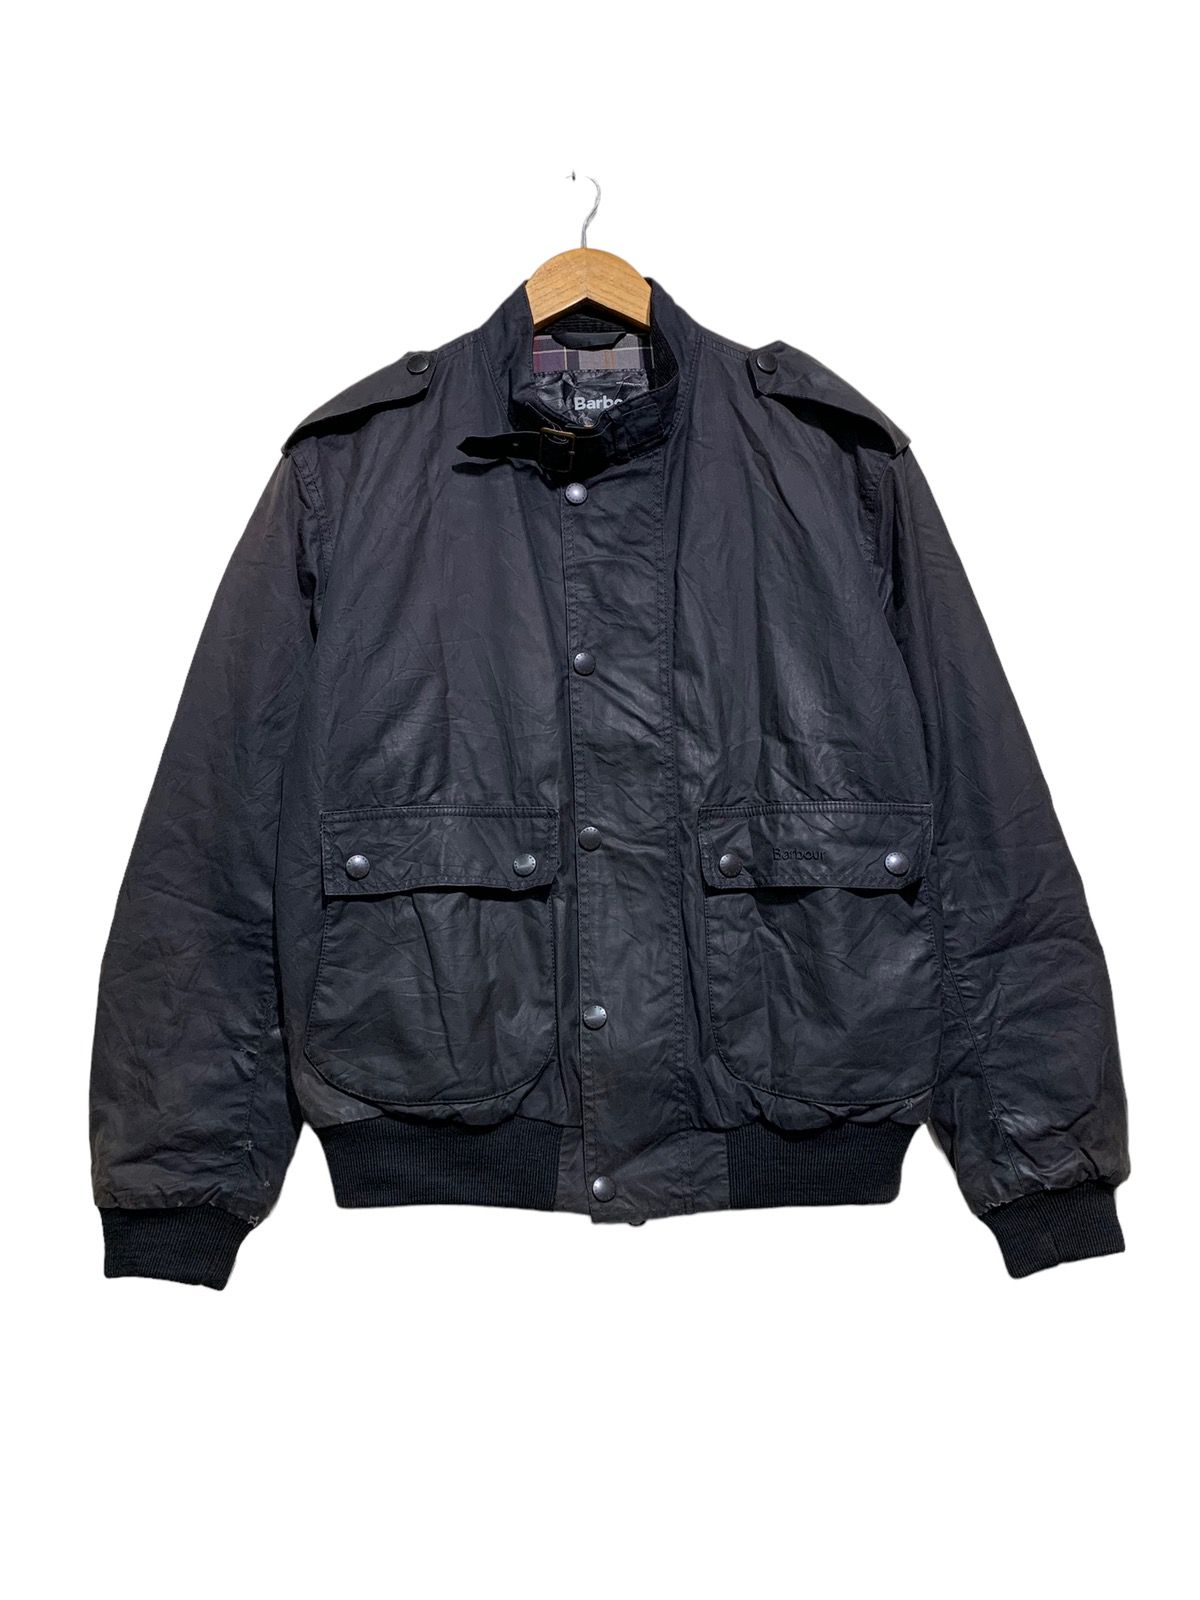 🔥BARBOUR INTERNATIONAL WAXED BOMBER JACKETS - 1